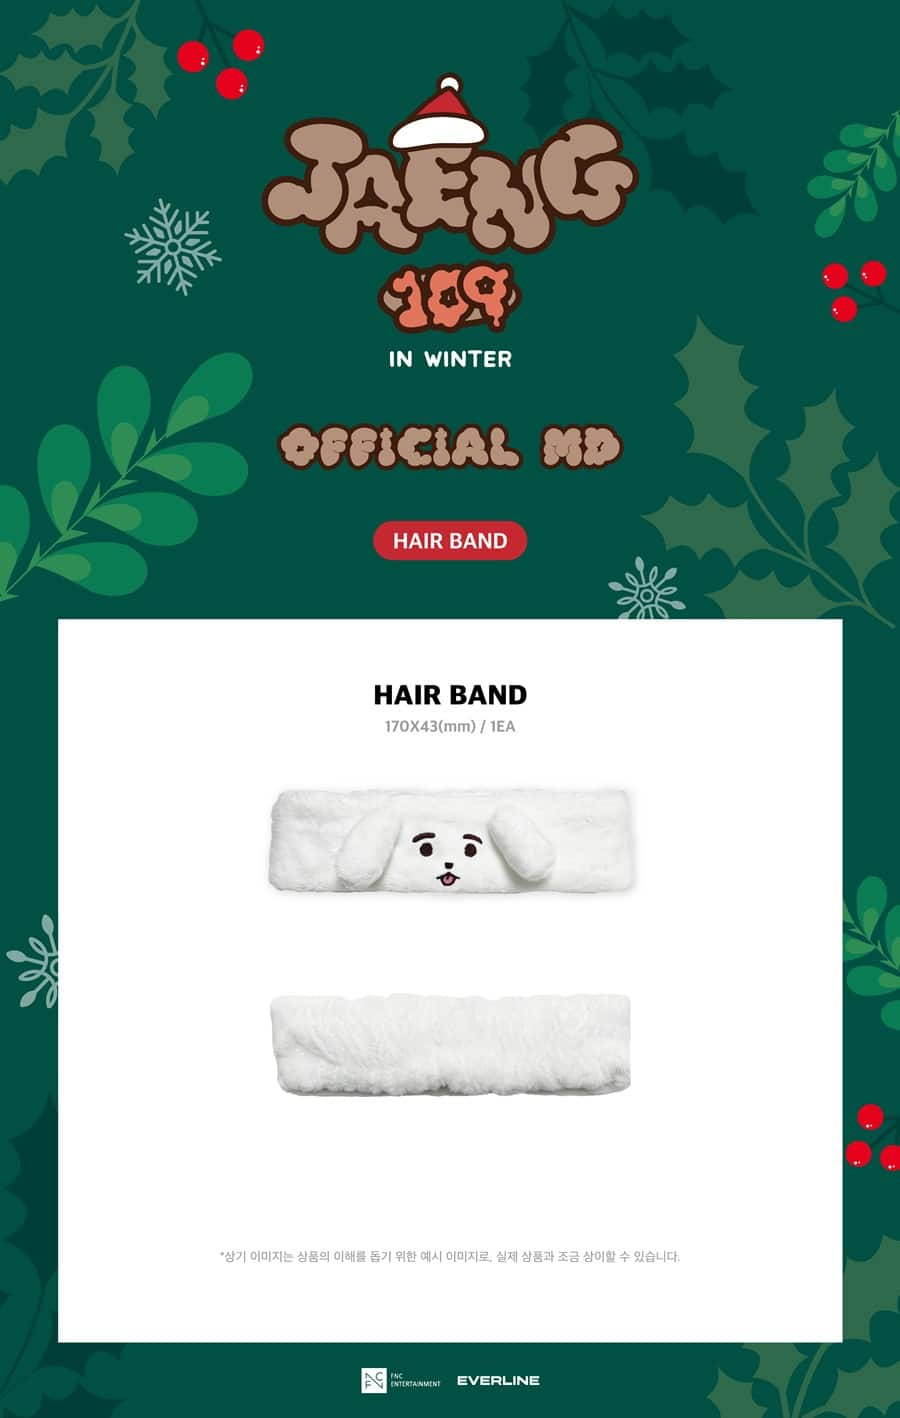 jaeng109-in-winter-pop-up-official-md-hair-band-wholesales